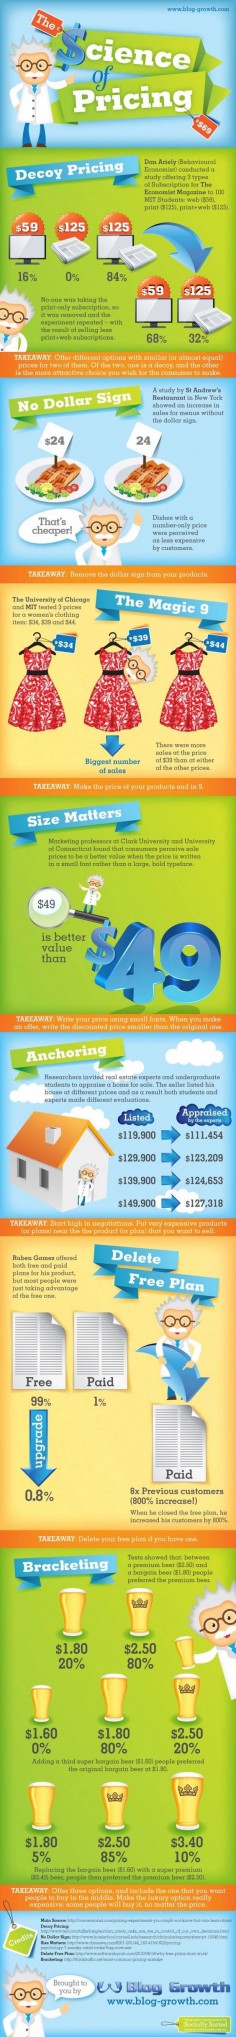 This is a great info graphic on pricing and pricing   Share :-)